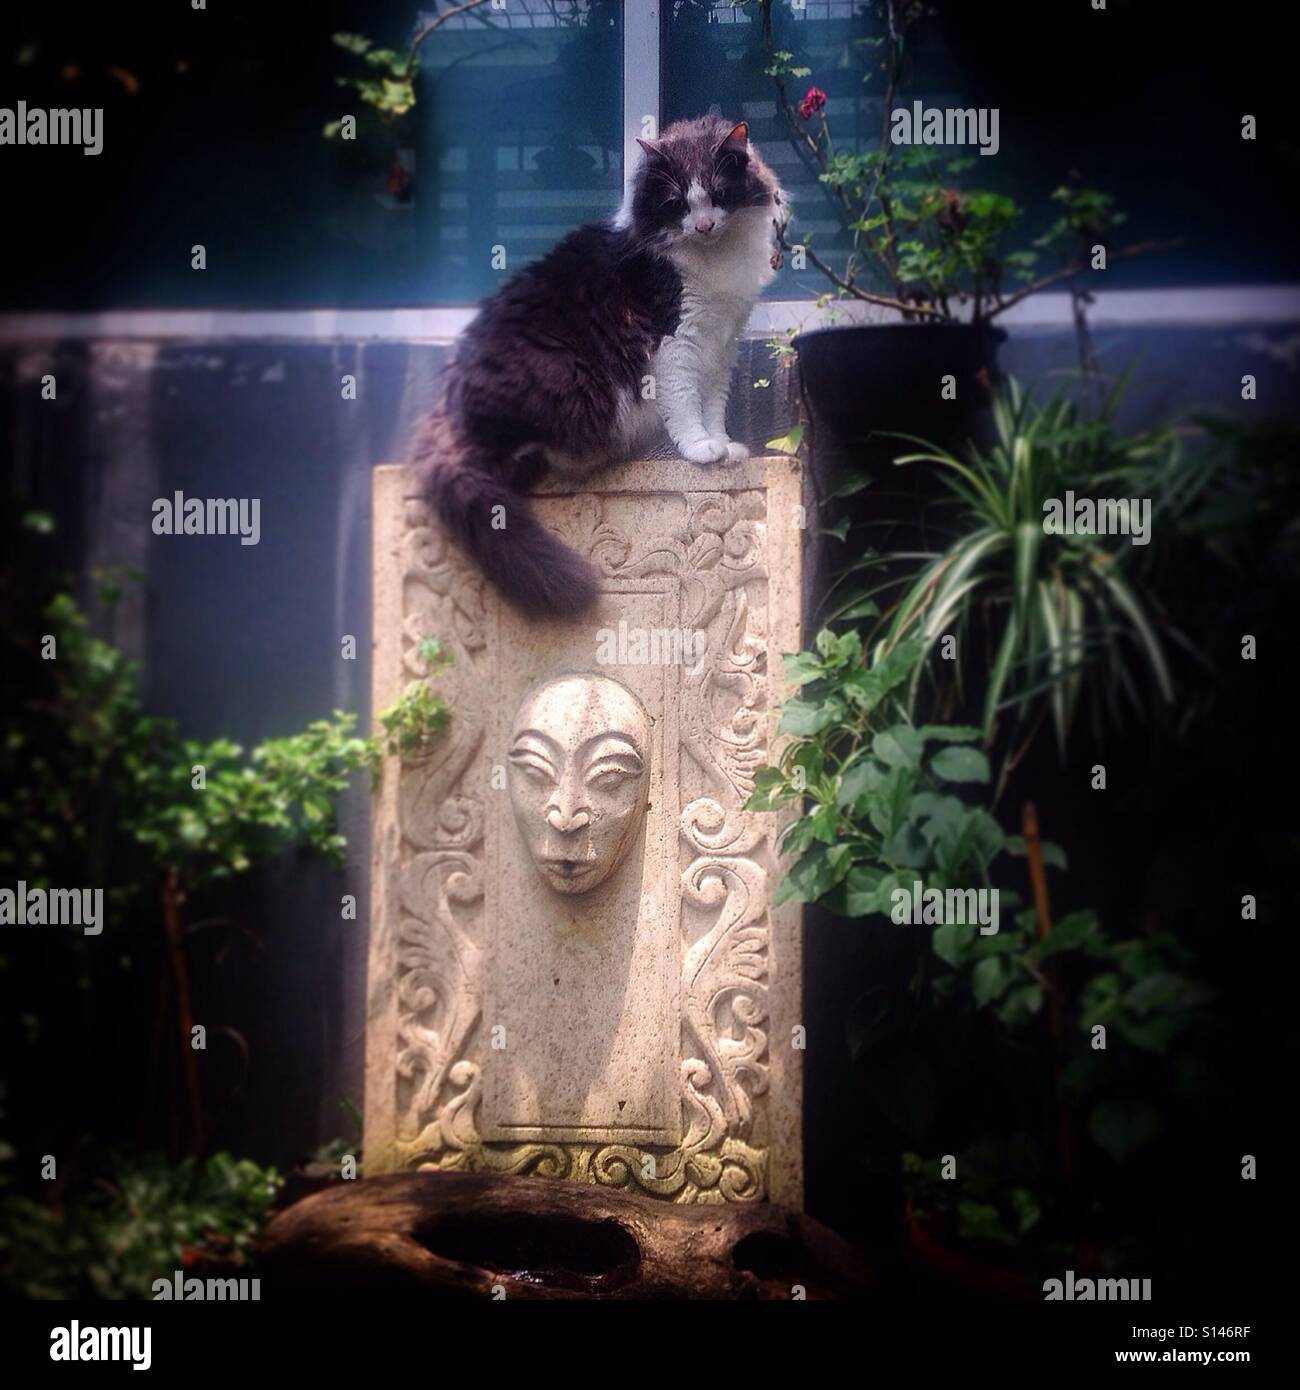 A cat on top of a fountain decorated with an Asian face in a garden in Colonia Roma, Mexico City, Mexico Stock Photo